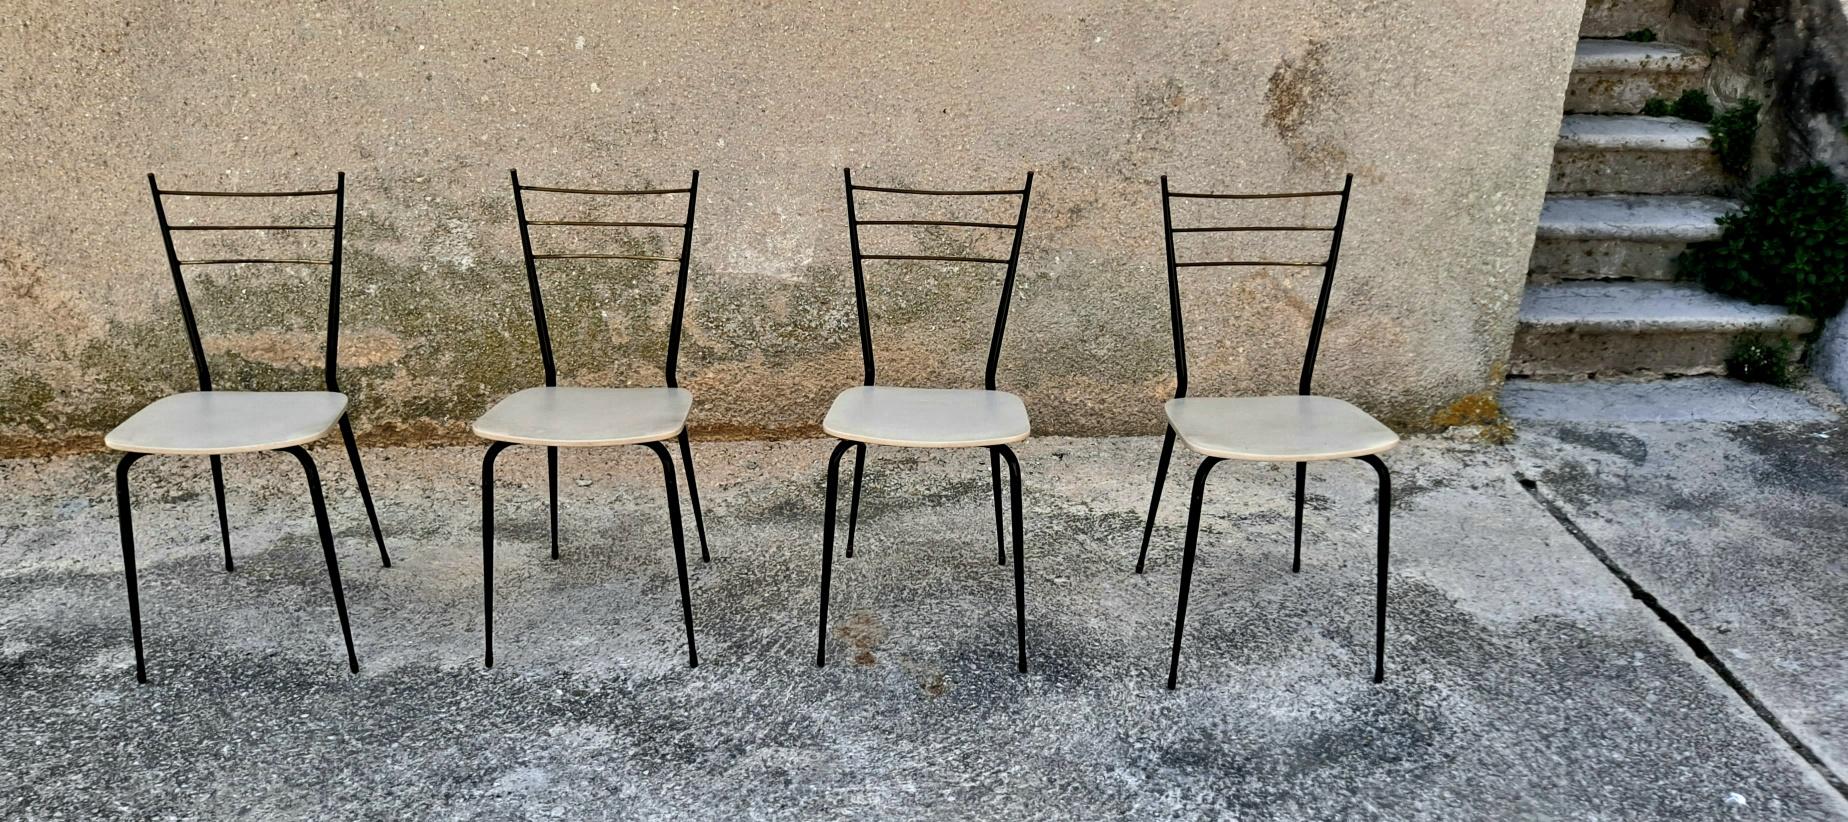 Mid-20th Century  Italian Ding Room Chairs Attributed to Ico Parisi and Paolo di Poli  For Sale